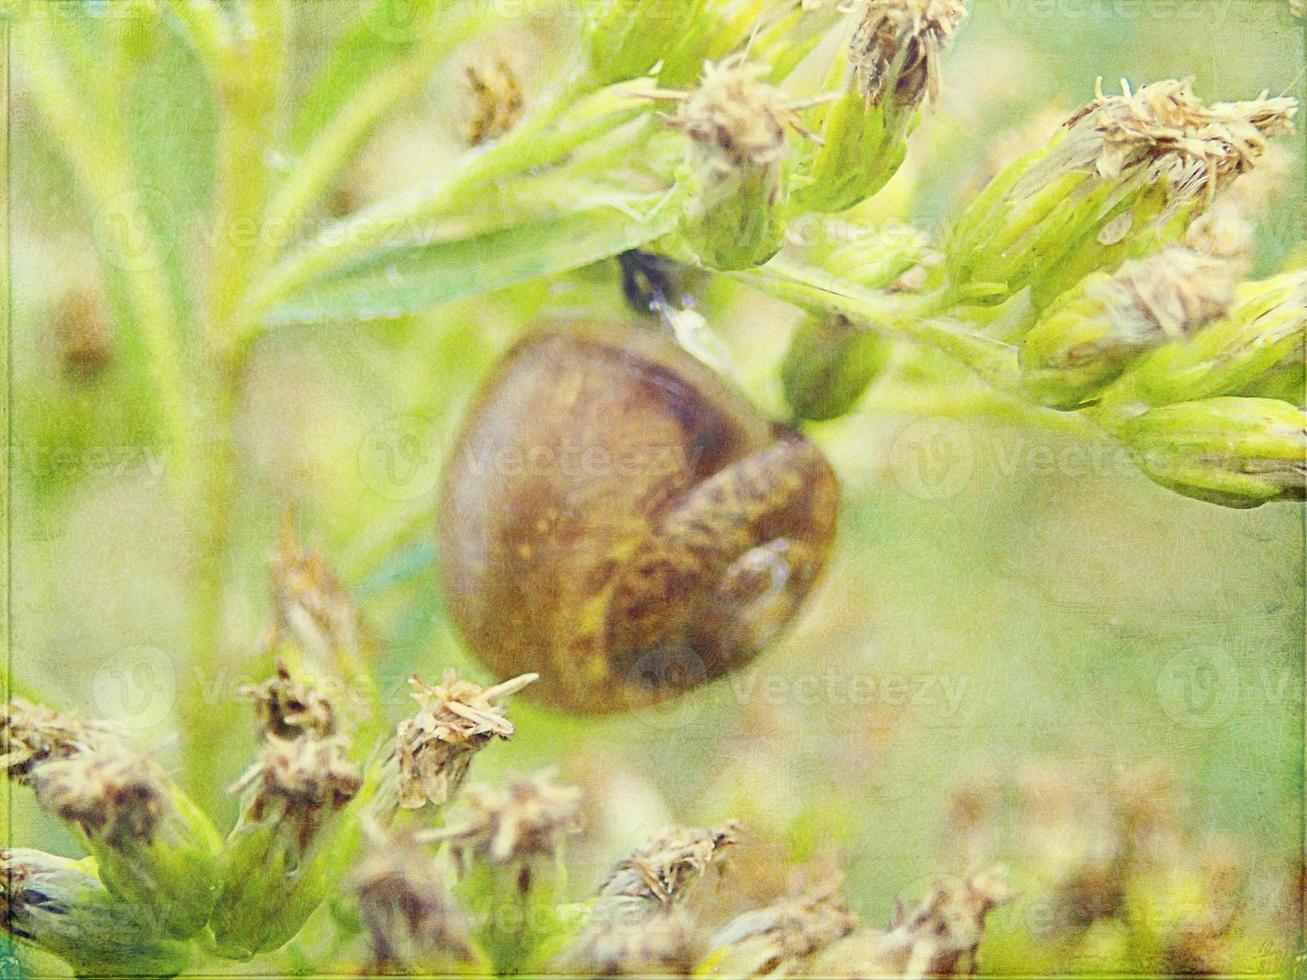 l little snail hidden in a colorful shell sleeping on the grass in a summer meadow photo